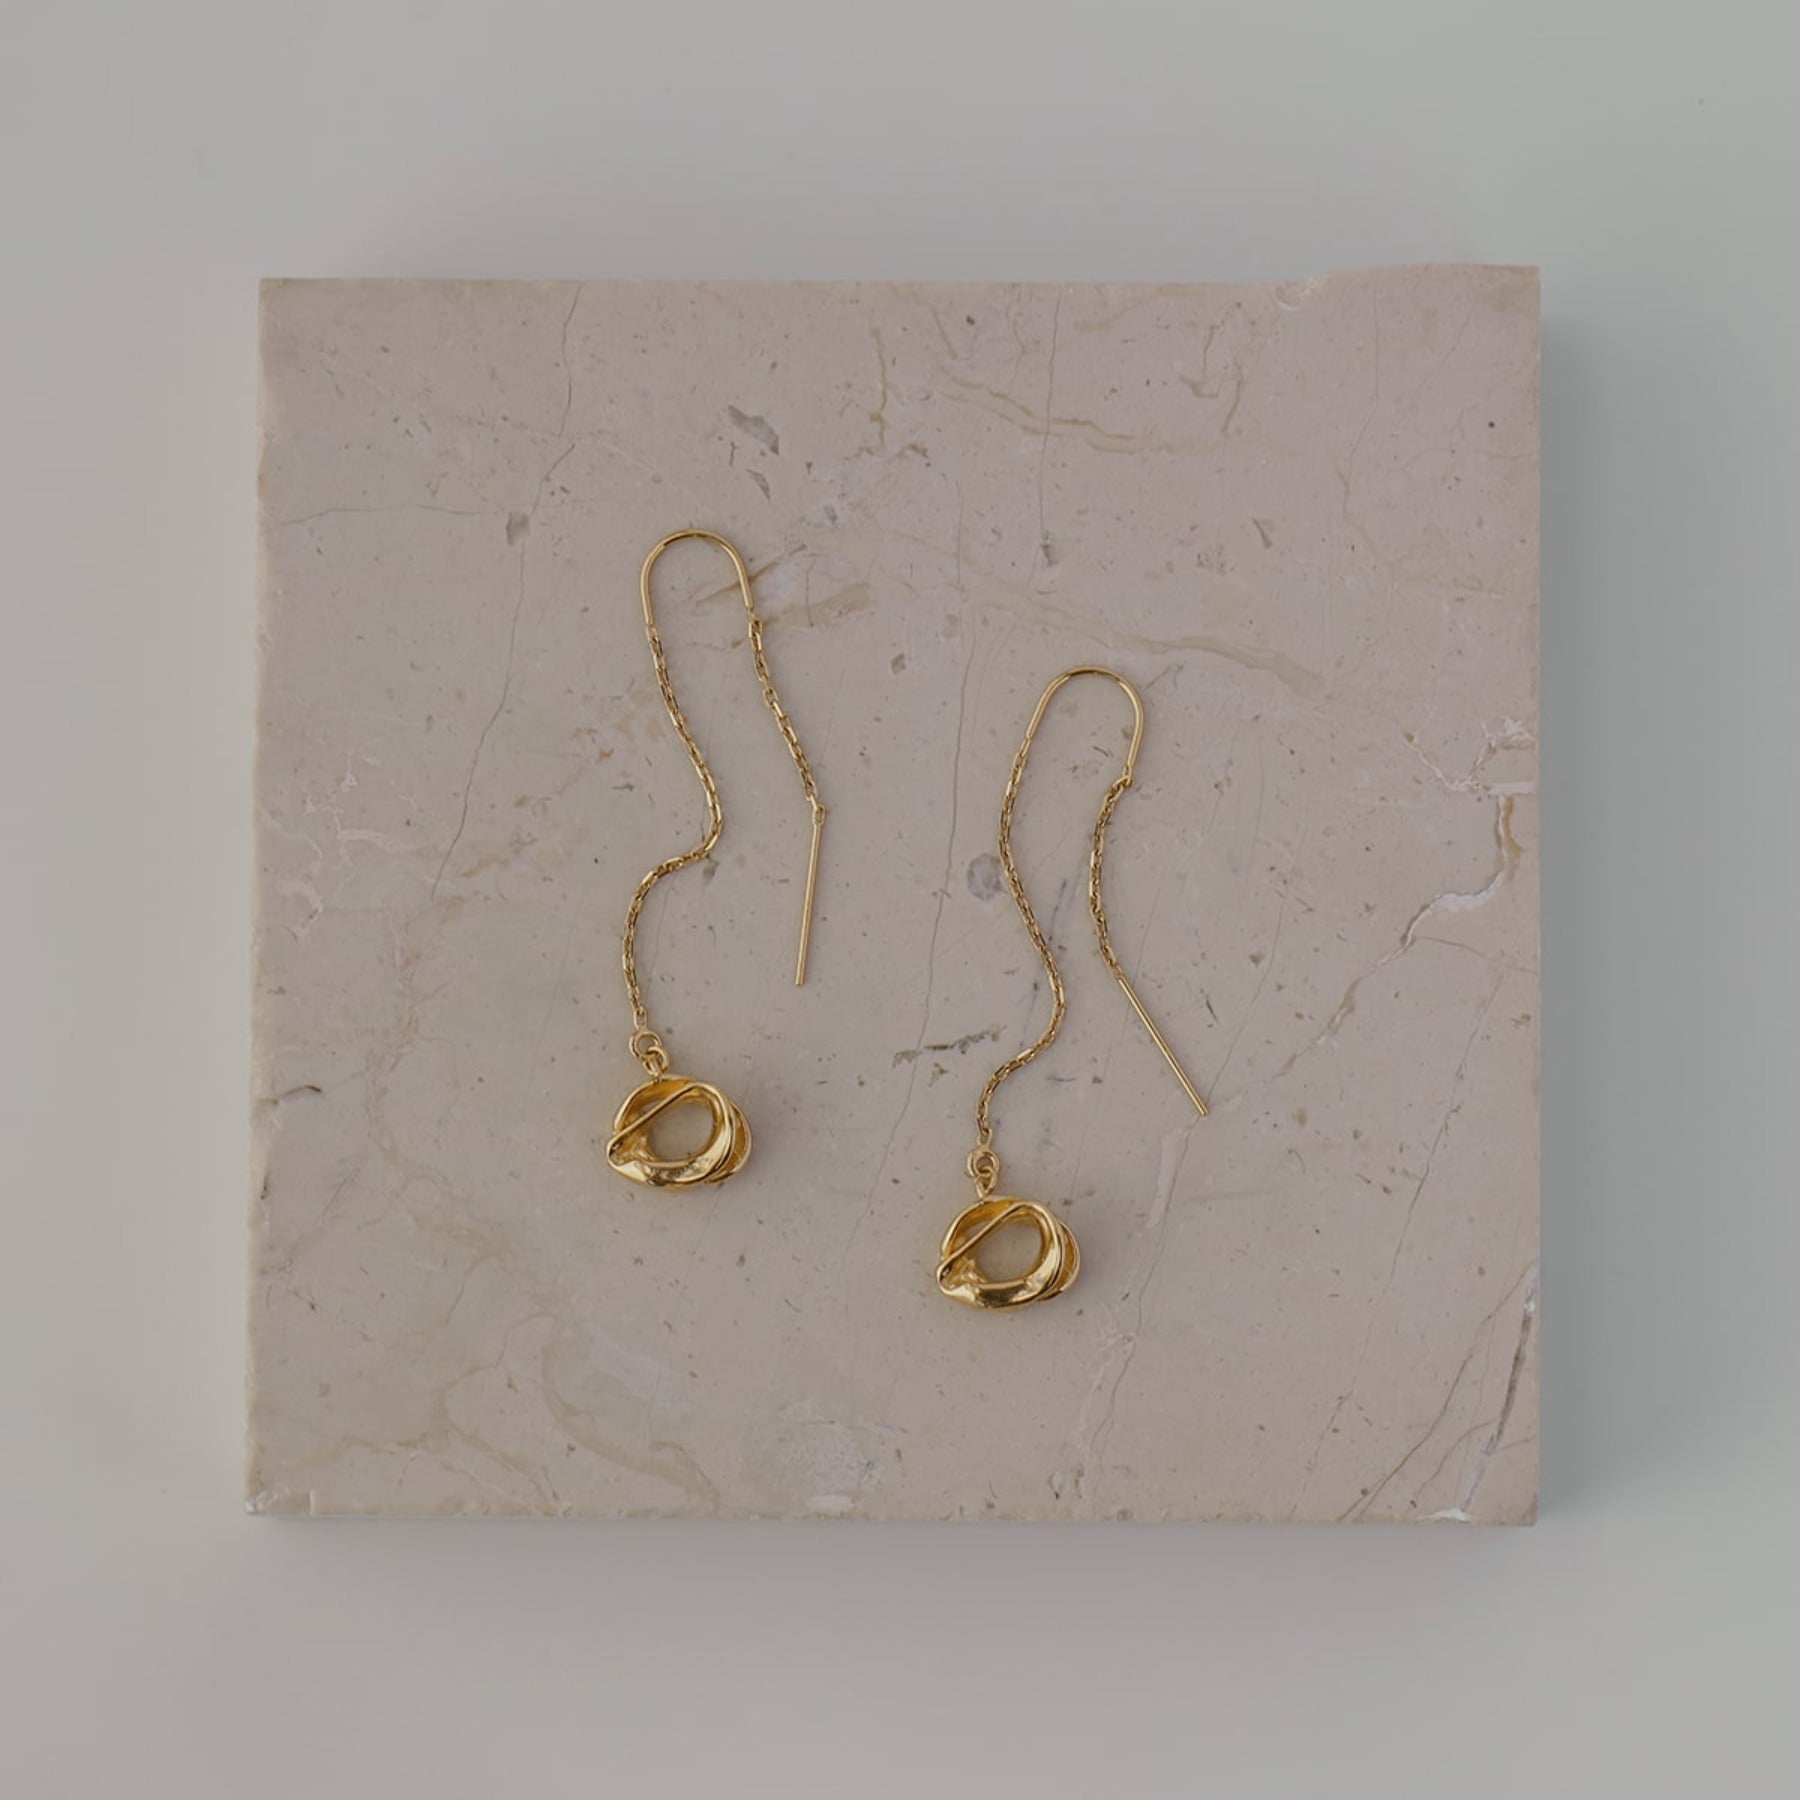 Abstract, circle dangling from a threader earring chain in 18k gold vermeil.